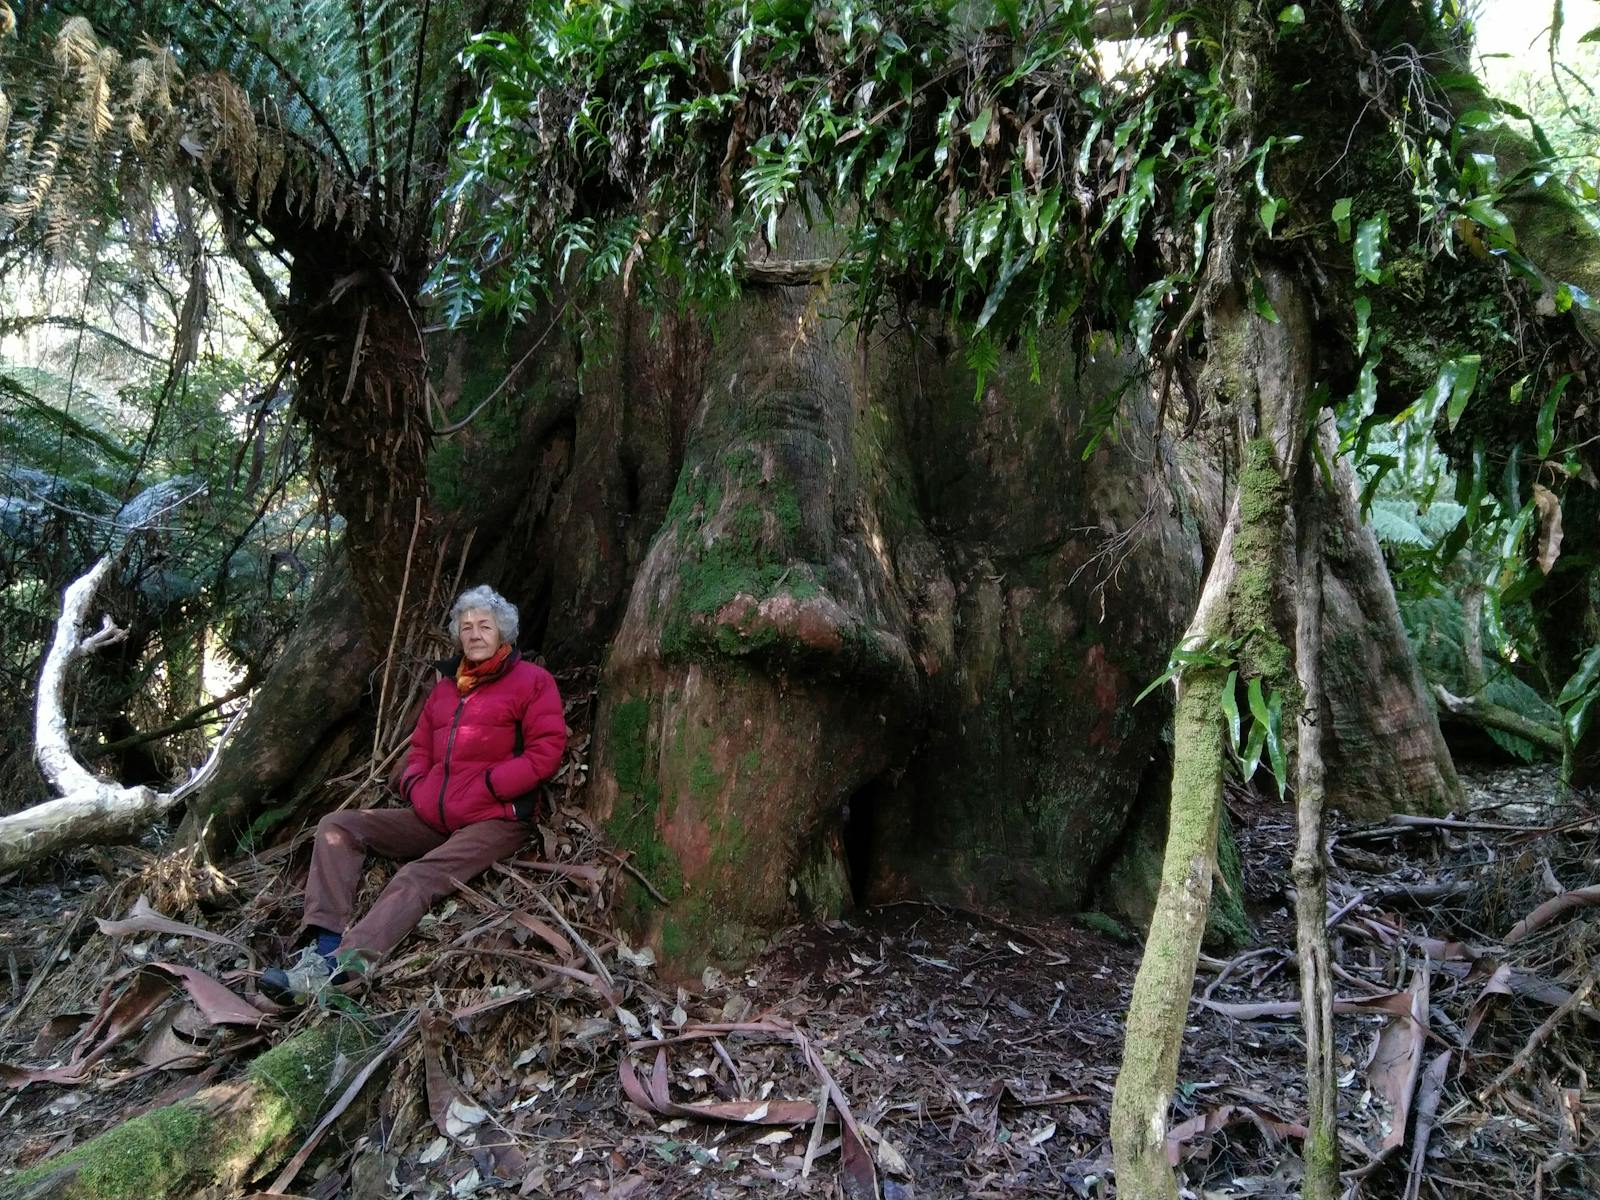 A giant forest tree provides shelter for a expeditioneer